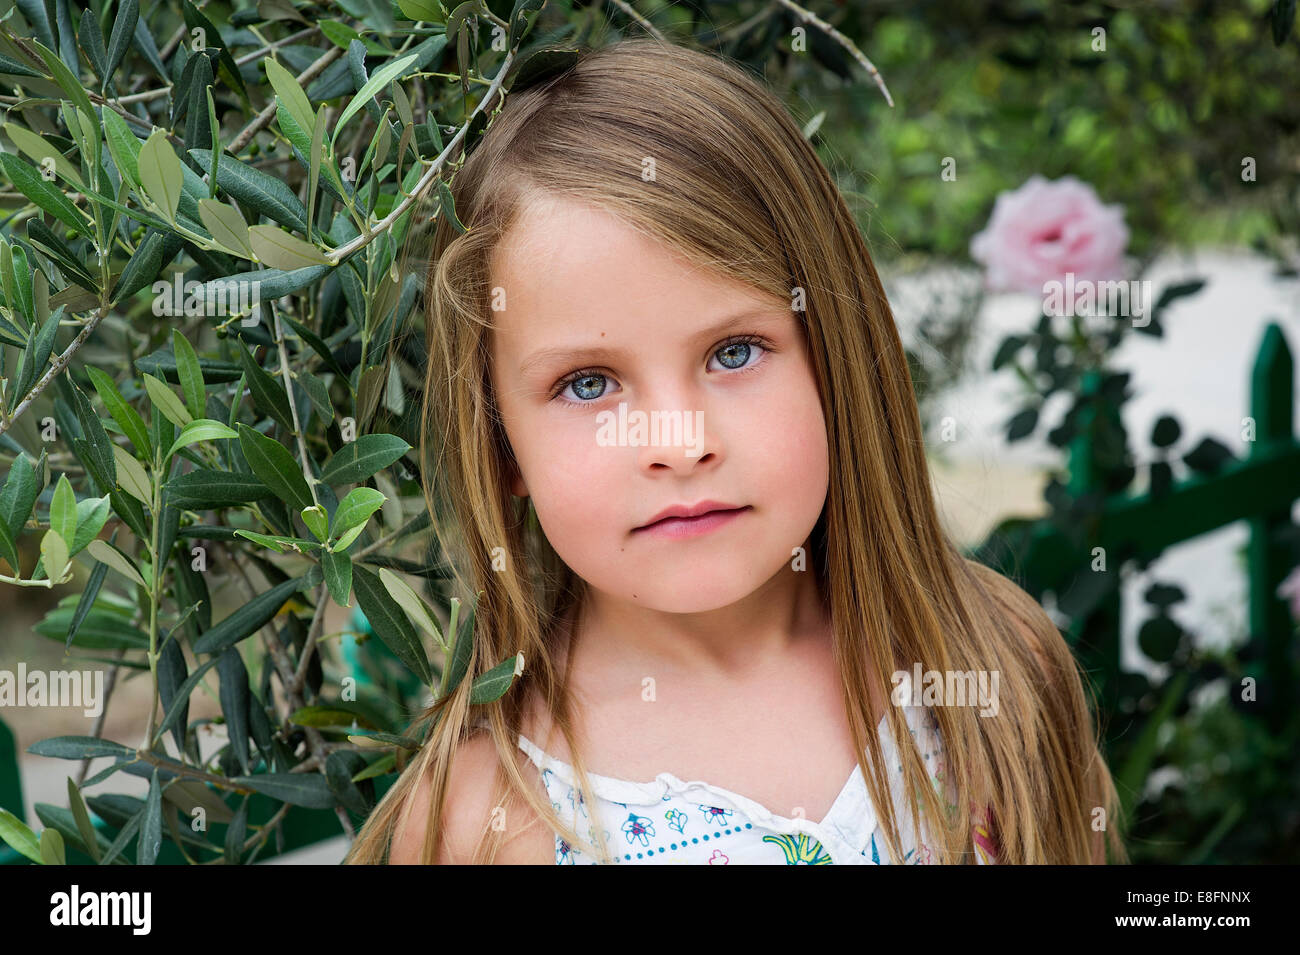 Greece, Portrait of young girl Stock Photo